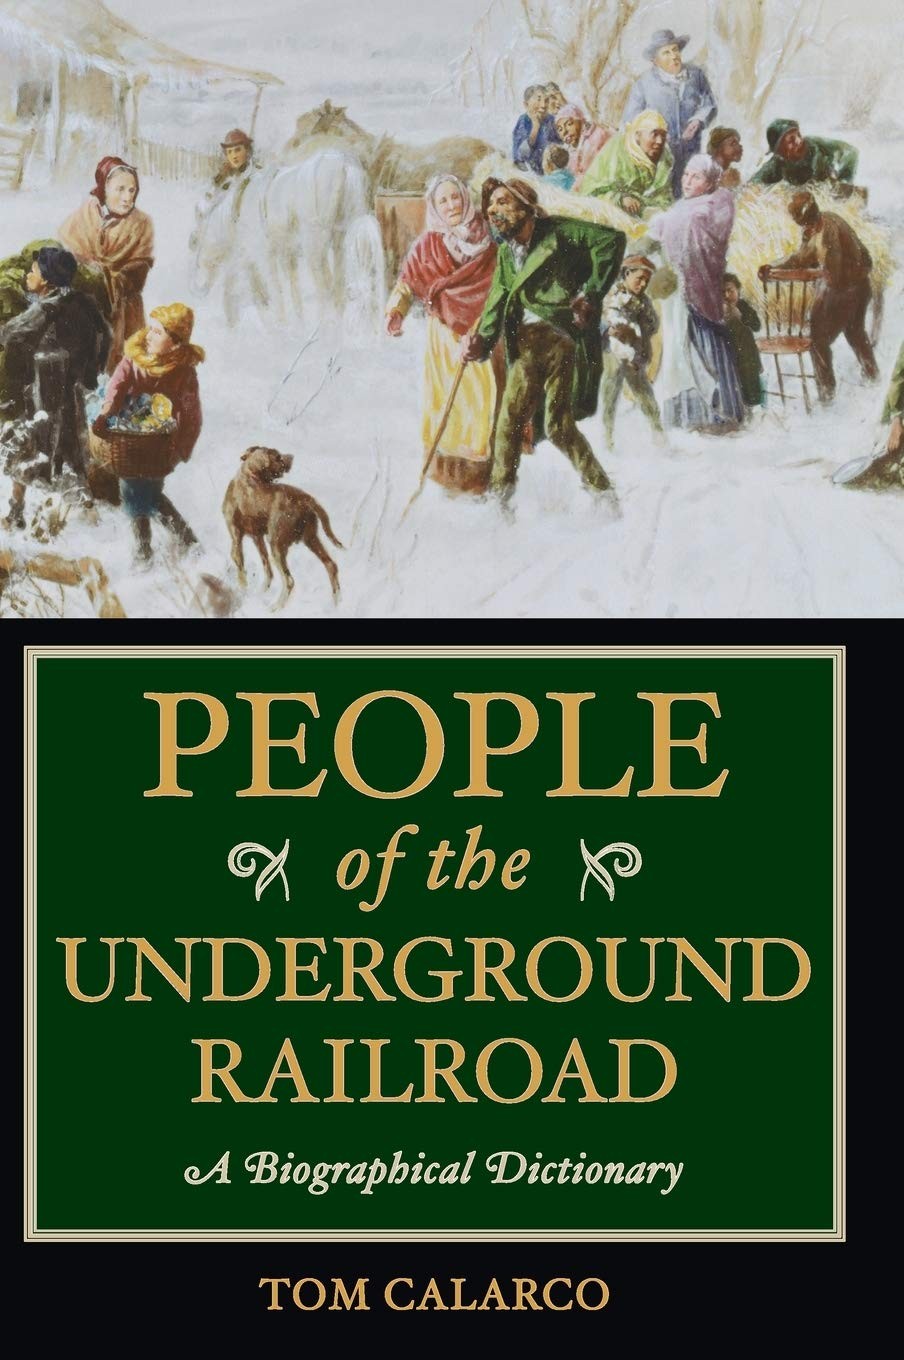 People of the Underground Railroad: A Biographical Dictionary